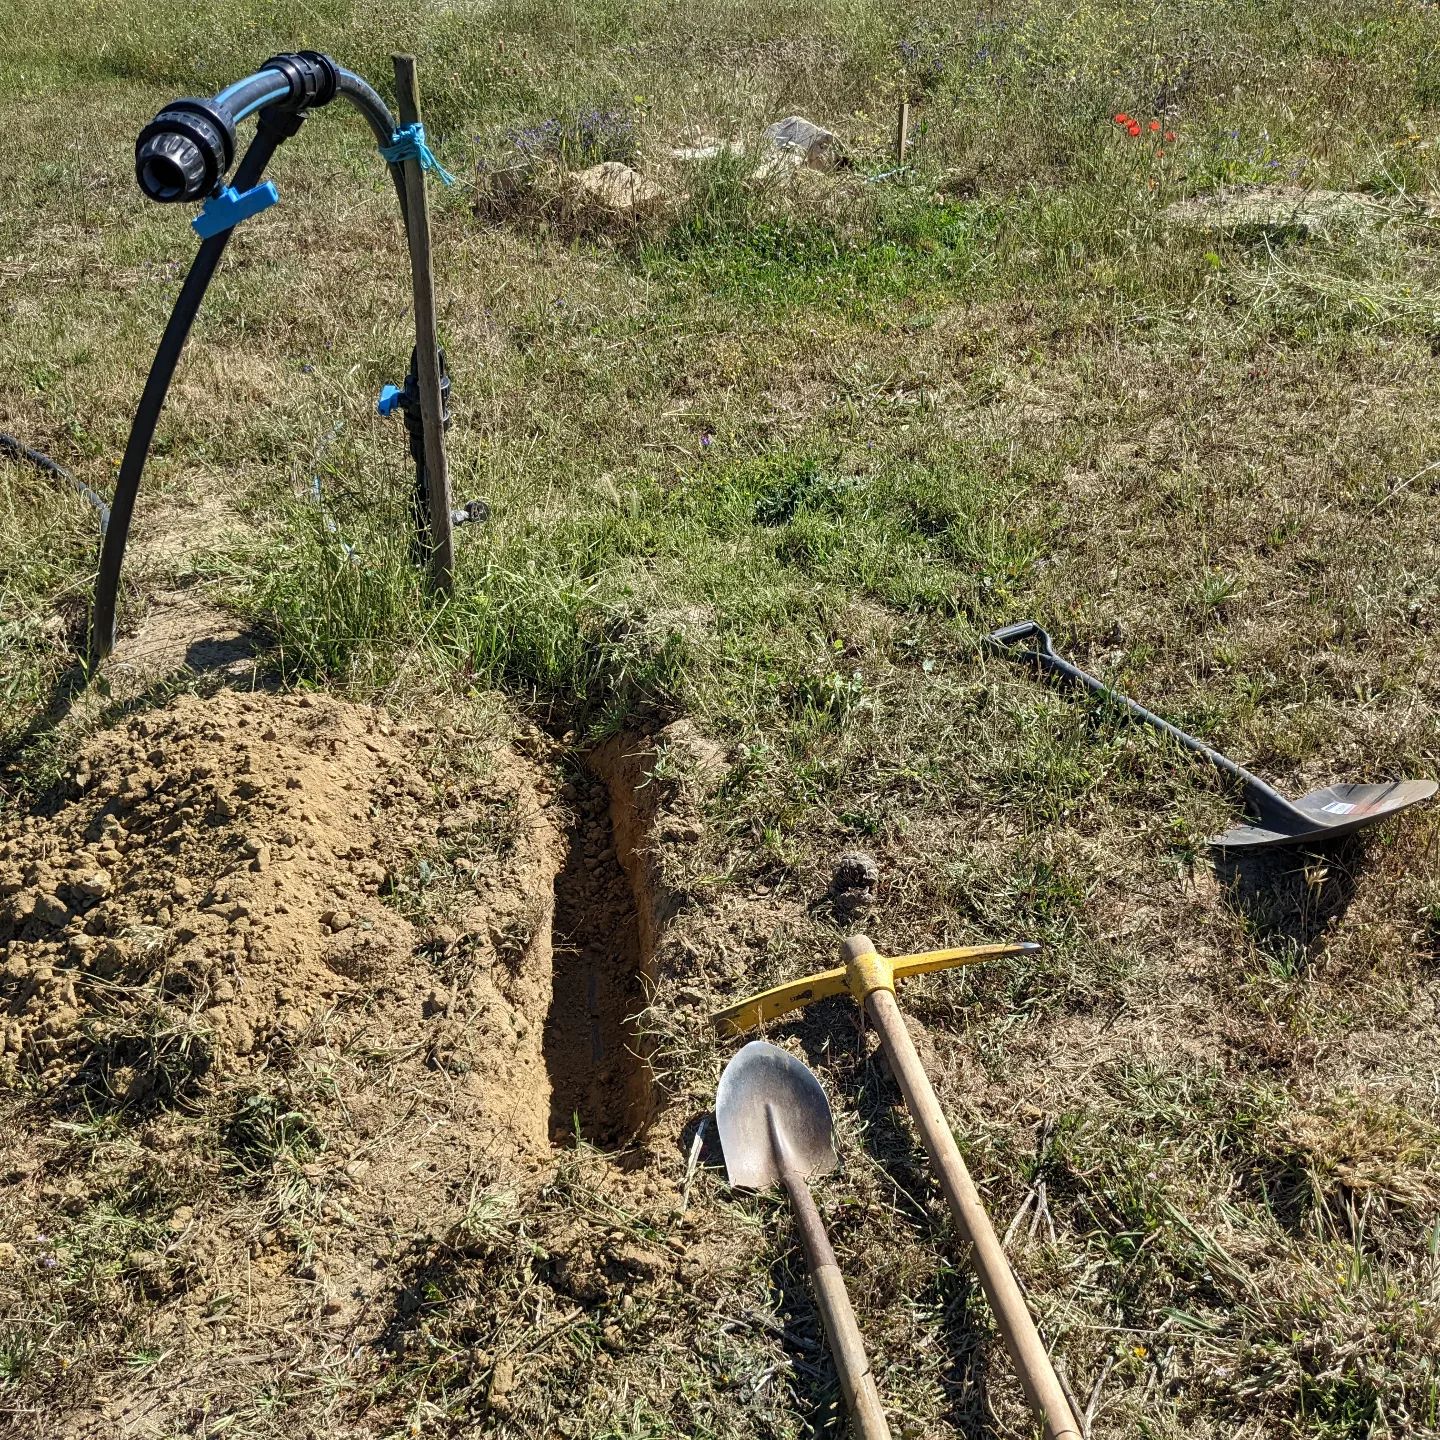 Digging up the old #irrigation mainline to connect the new one